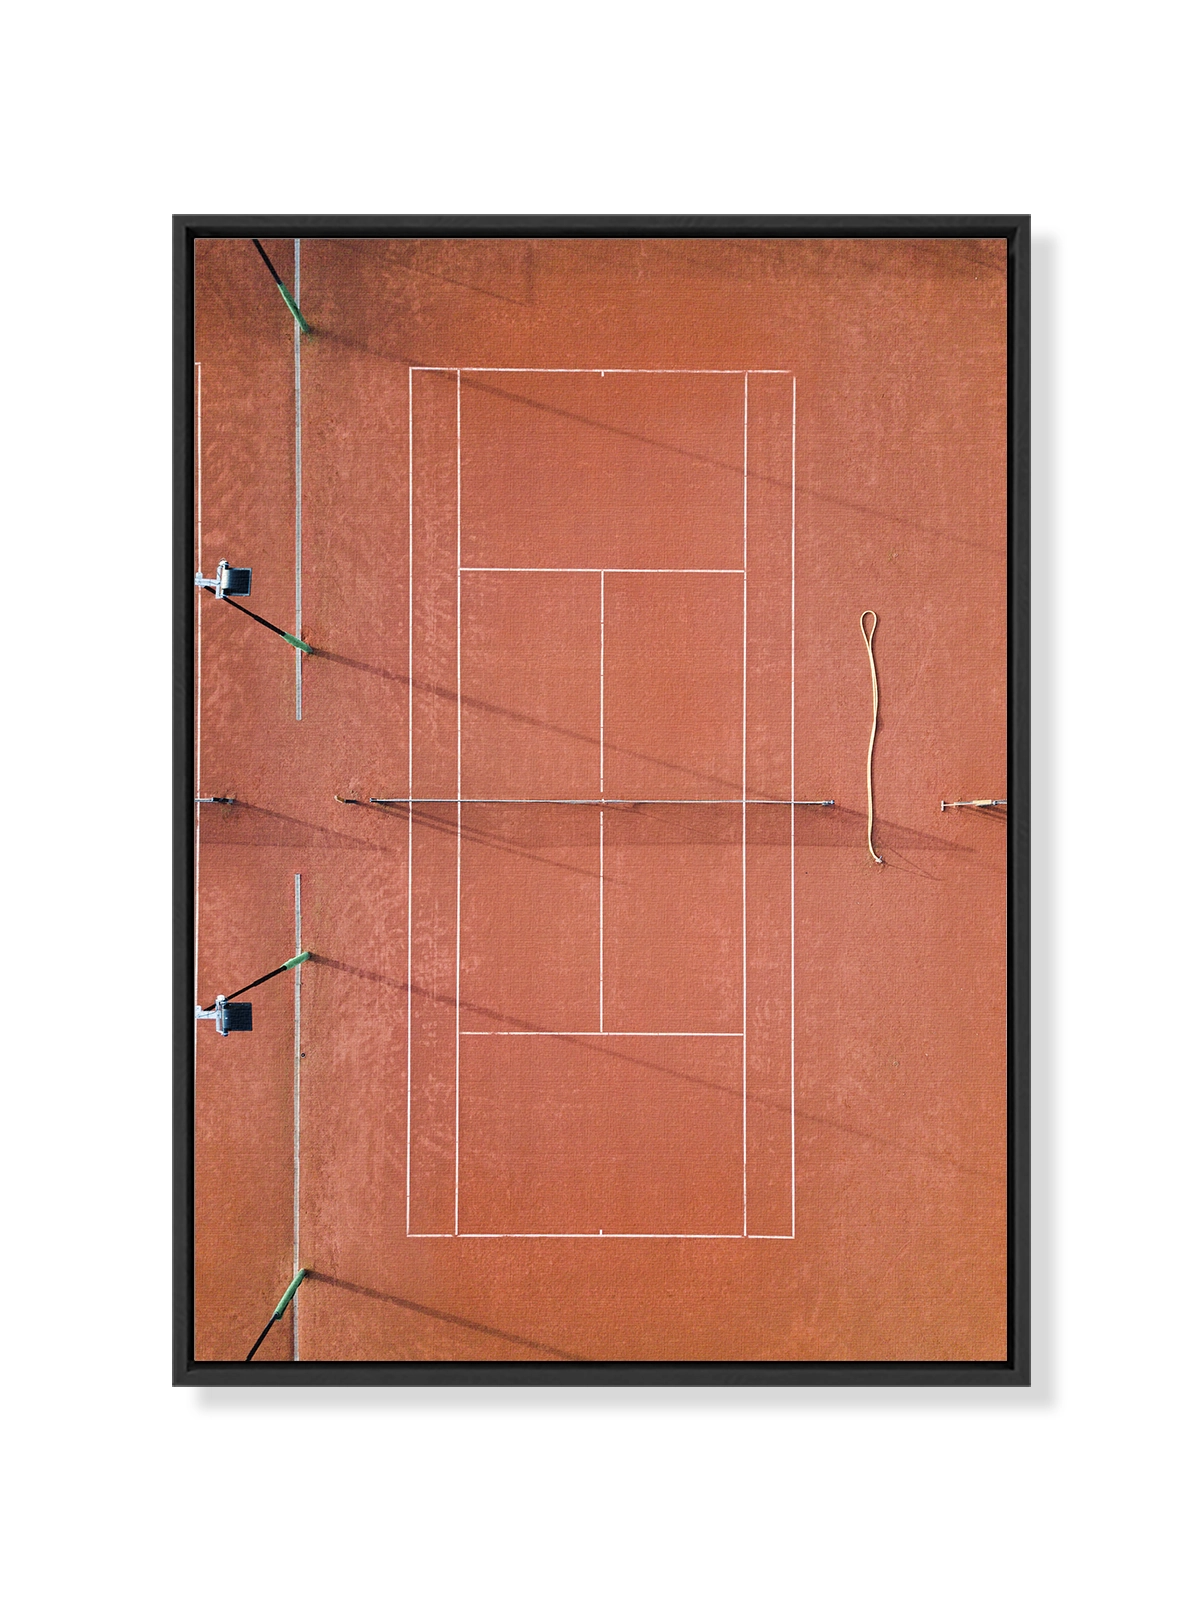 Red Tennis Court at Sunrise